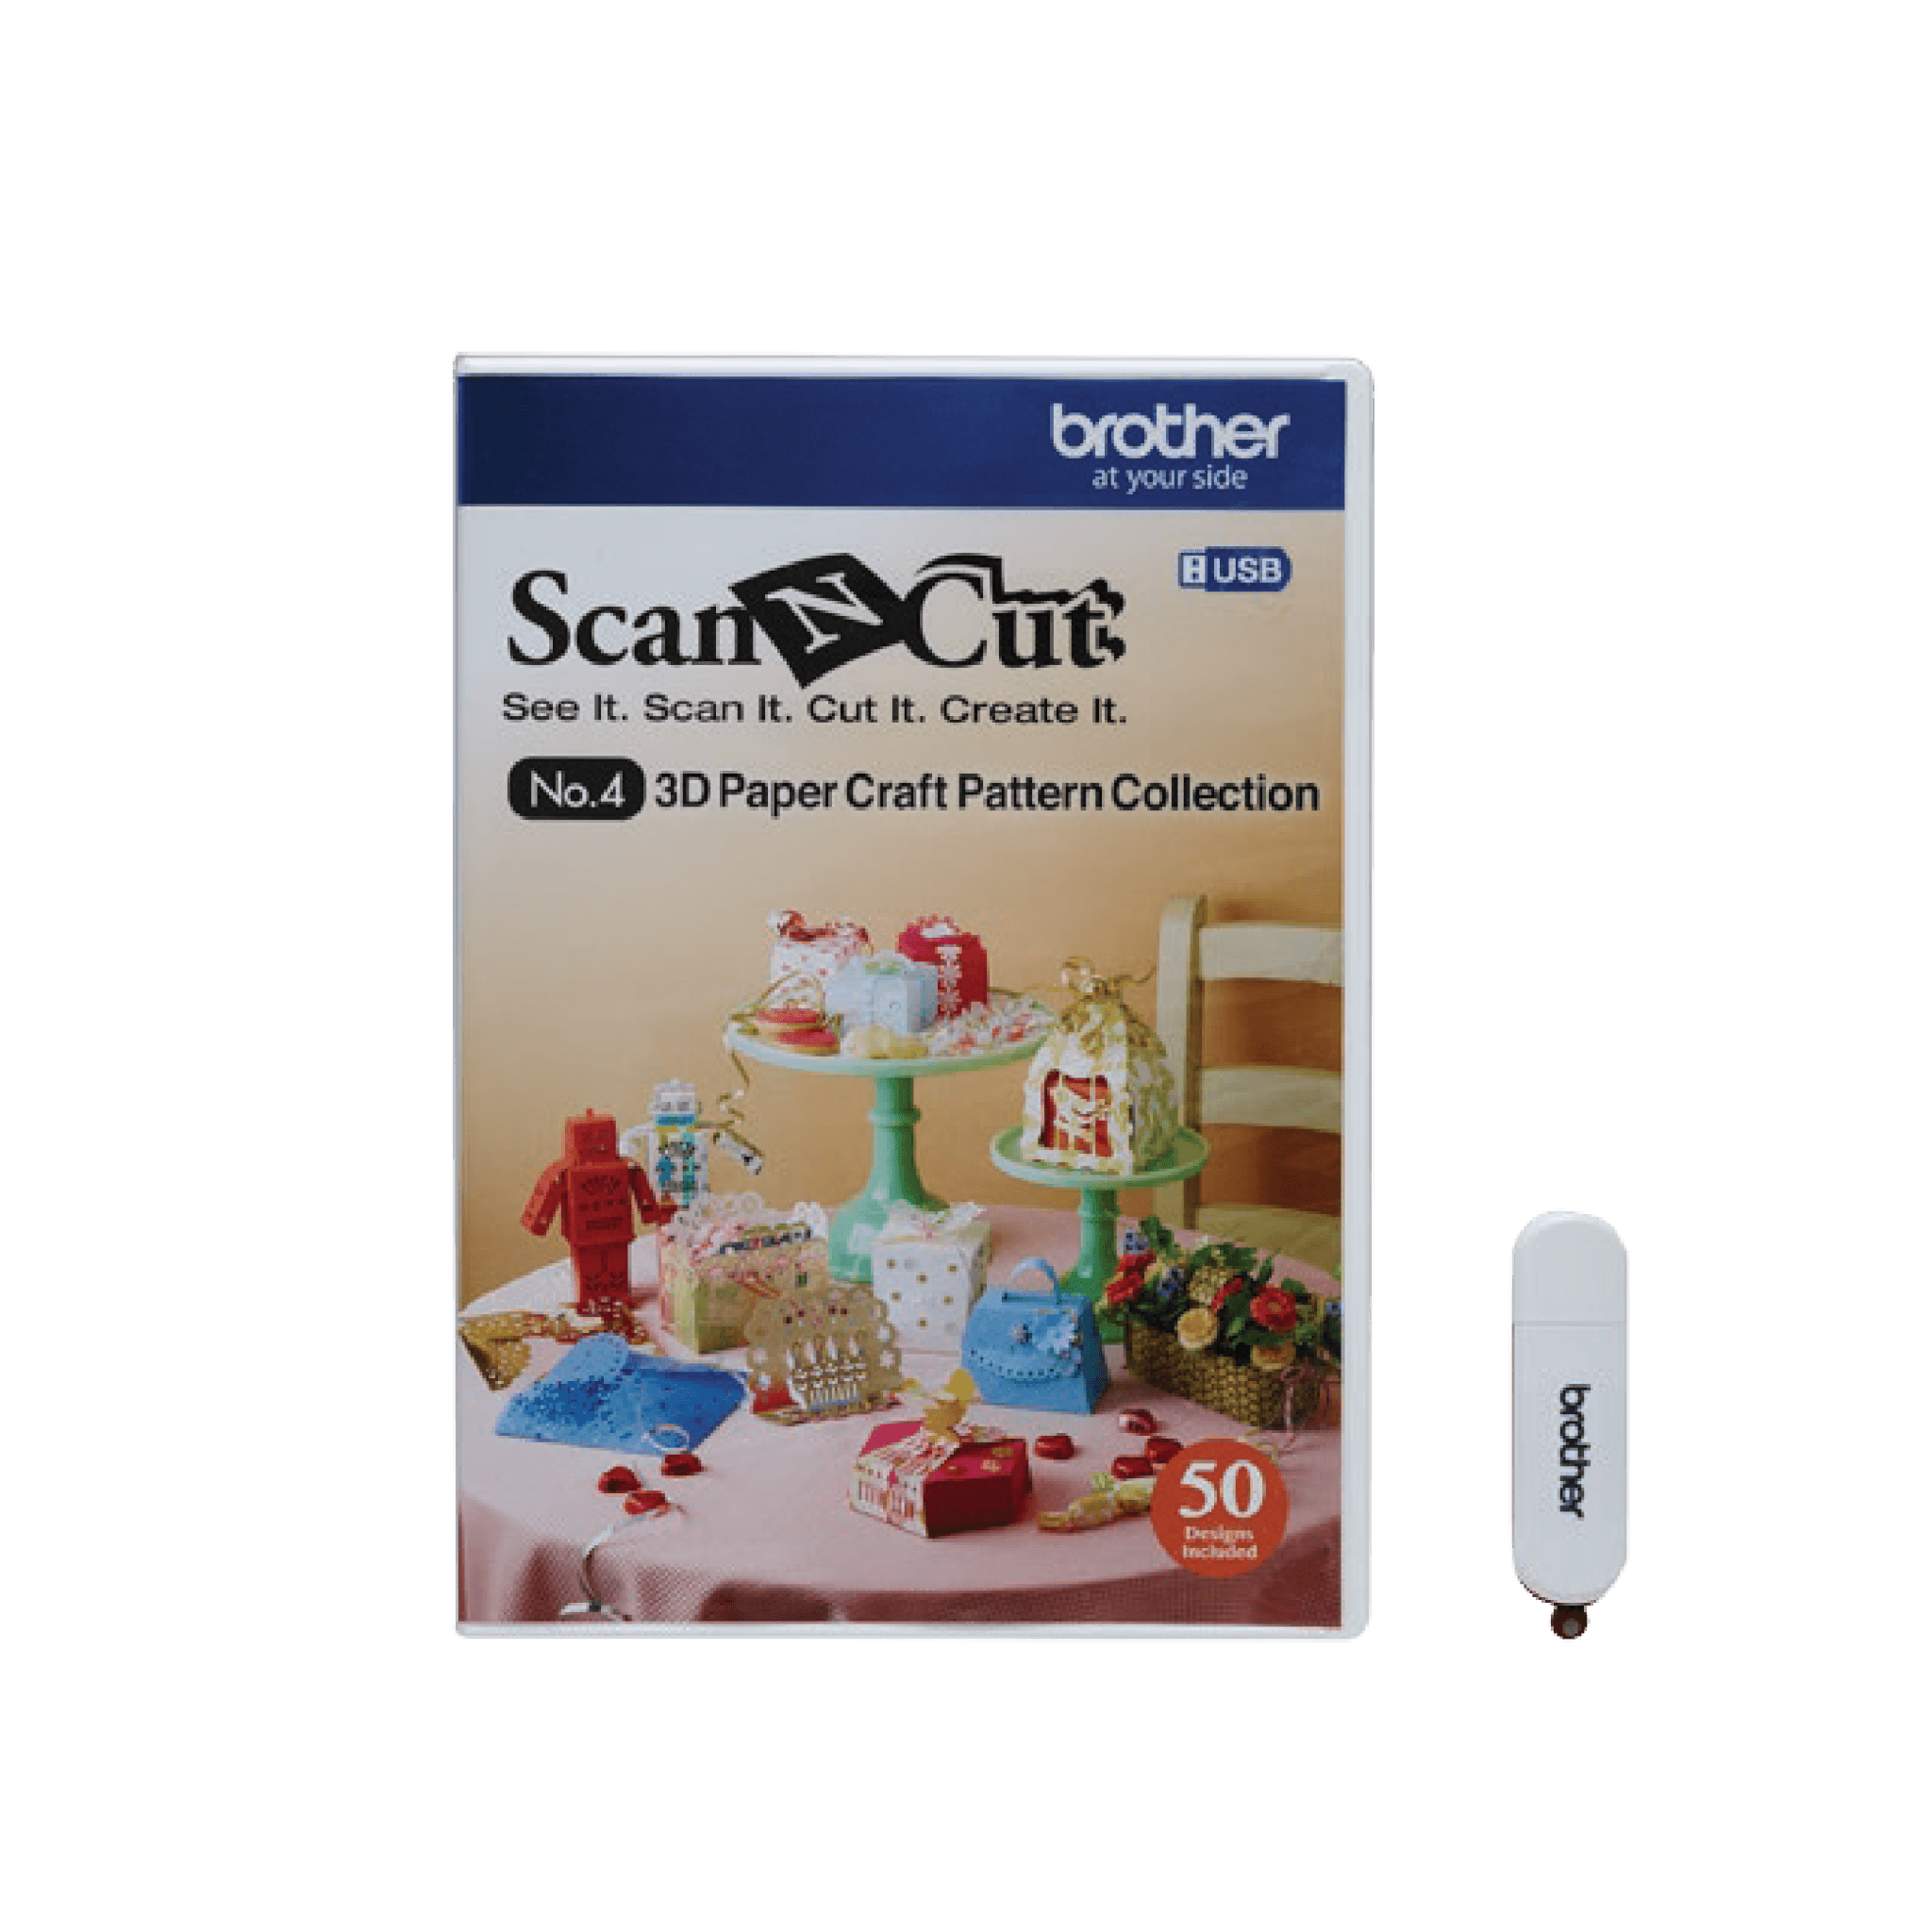 Scanncut 3D Paper Craft Pattern Collection